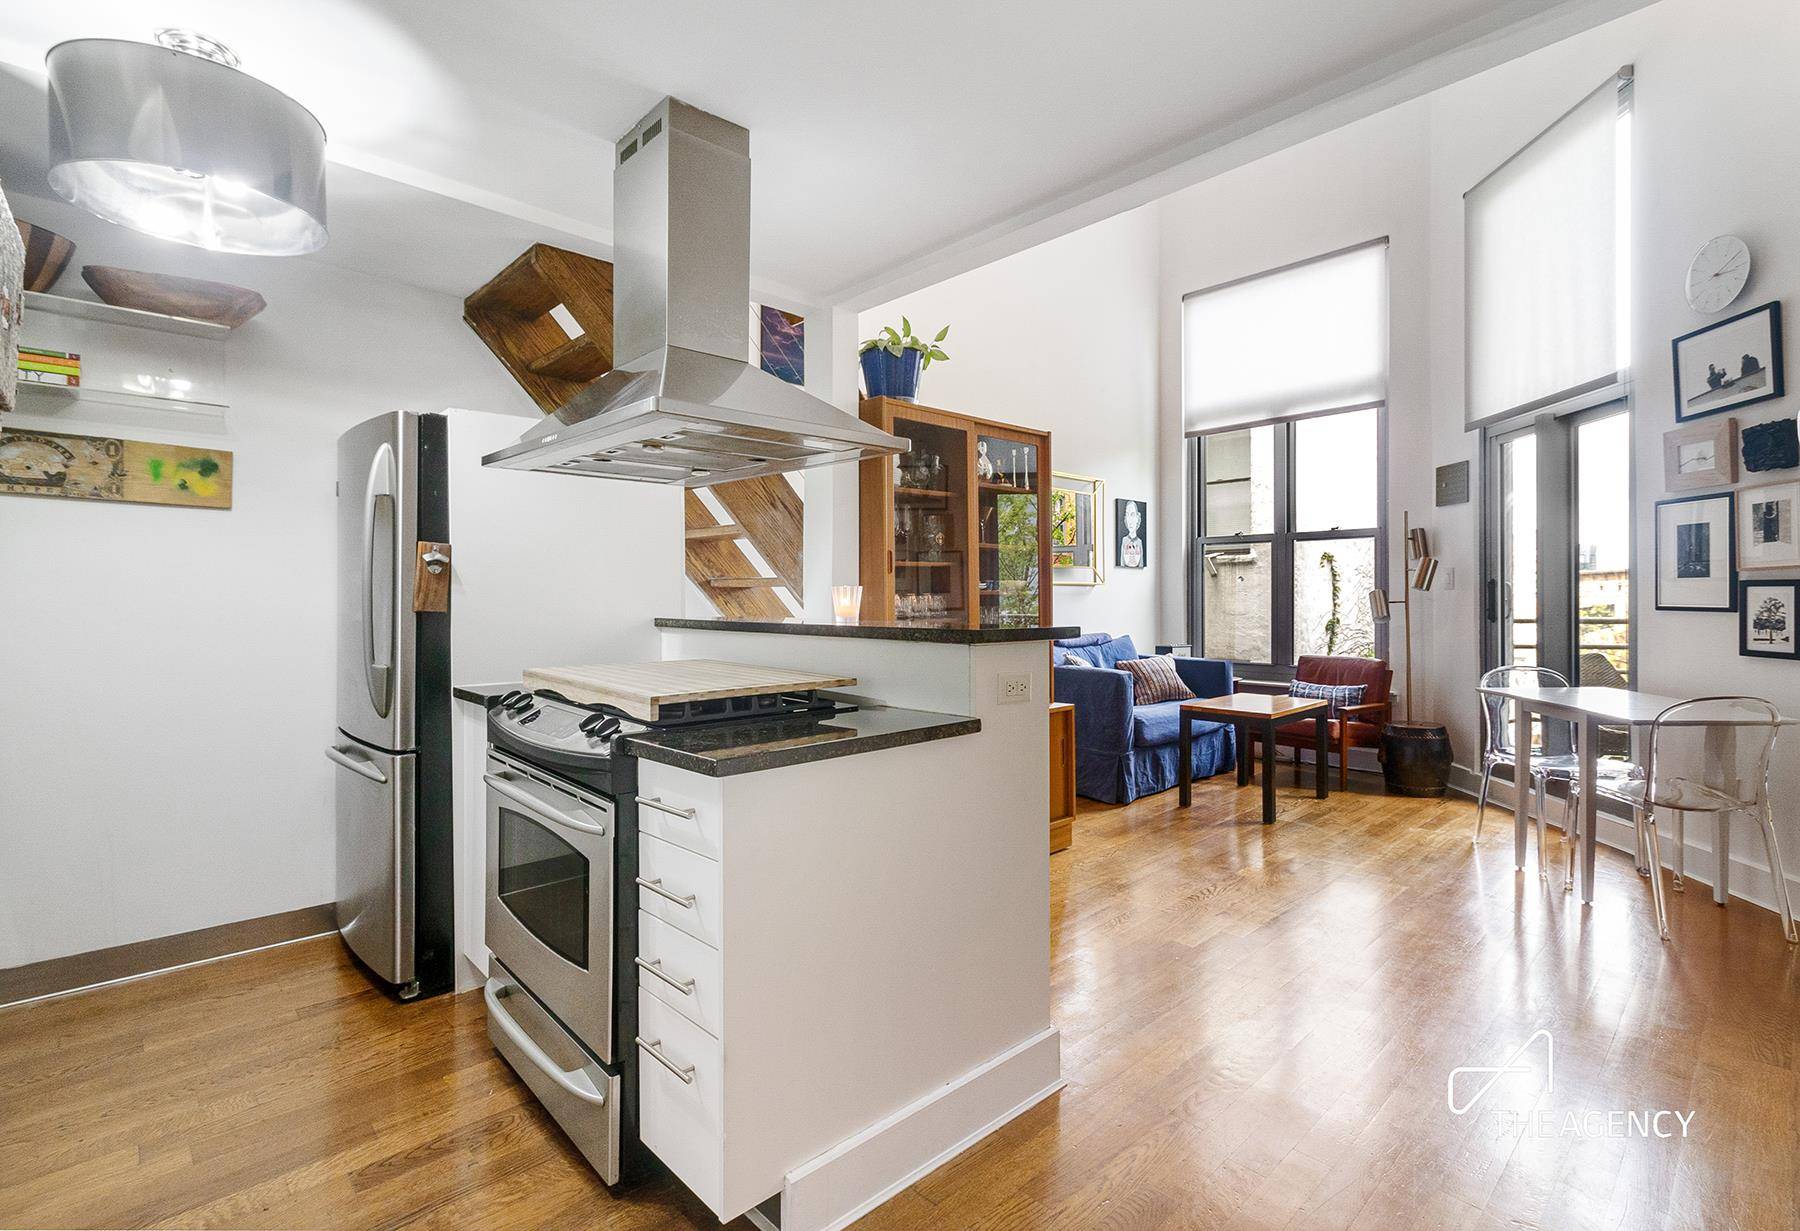 Welcome home to this light filled Williamsburg duplex with unbeatable monthlies !